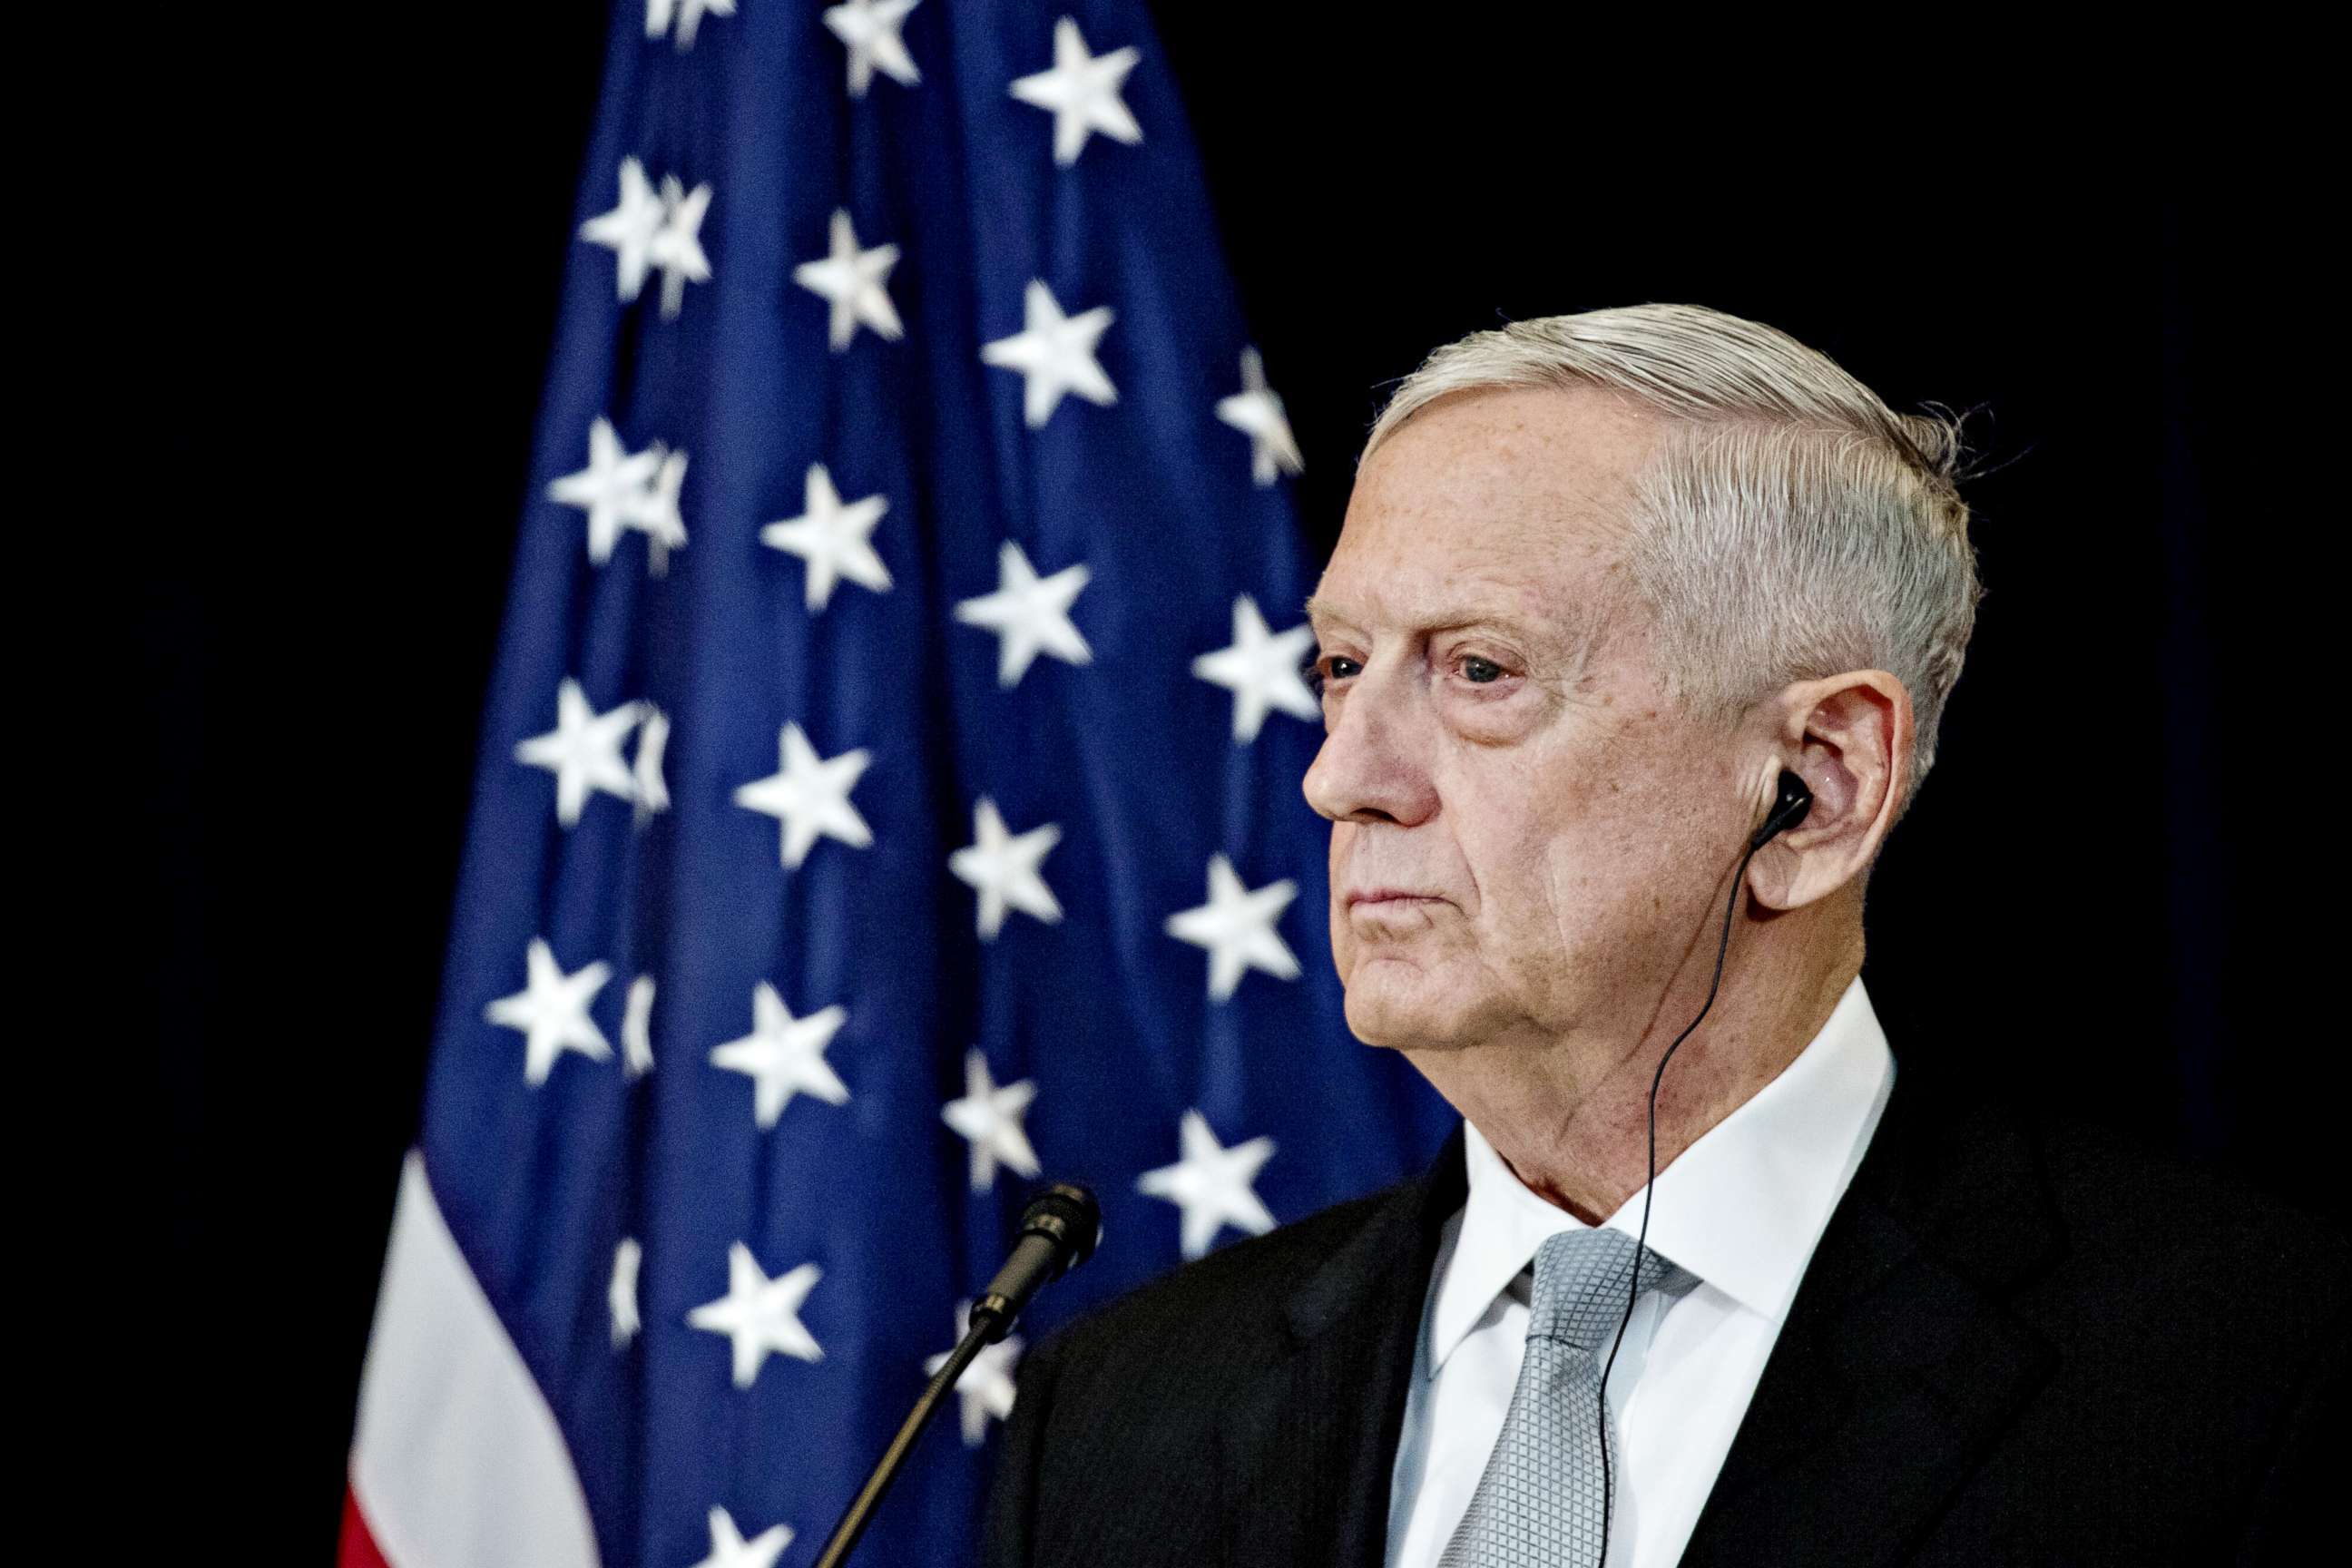 PHOTO: James Mattis, U.S. secretary of defense, listens at a news conference at the State Department in Washington, D.C.,  Aug. 17, 2017.  